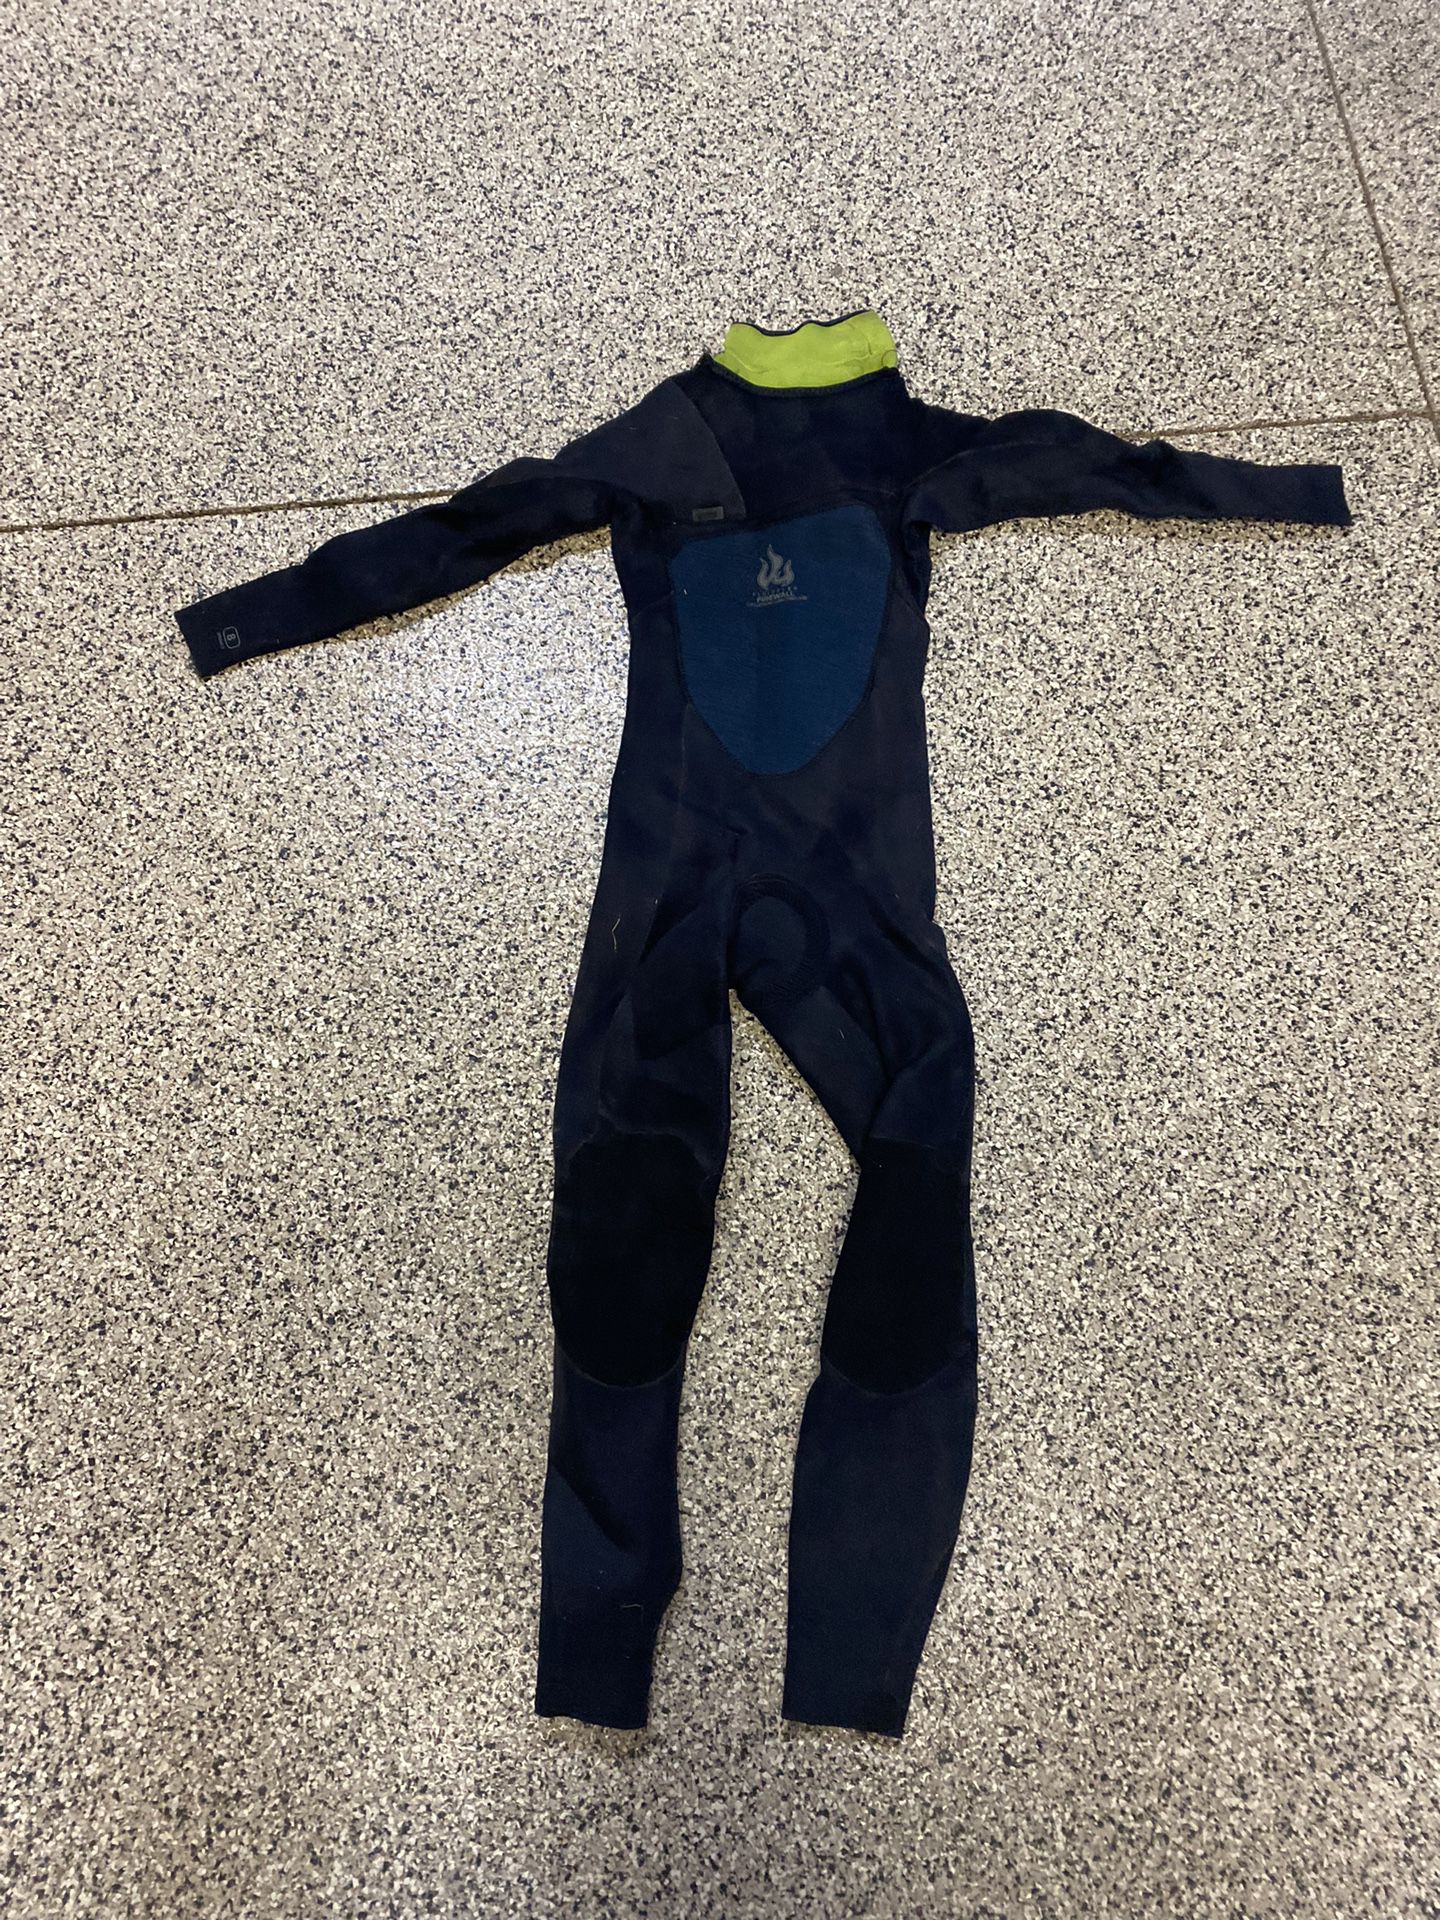 2 Kids O’Neill Wet Suits, Size 8 - Full Length 